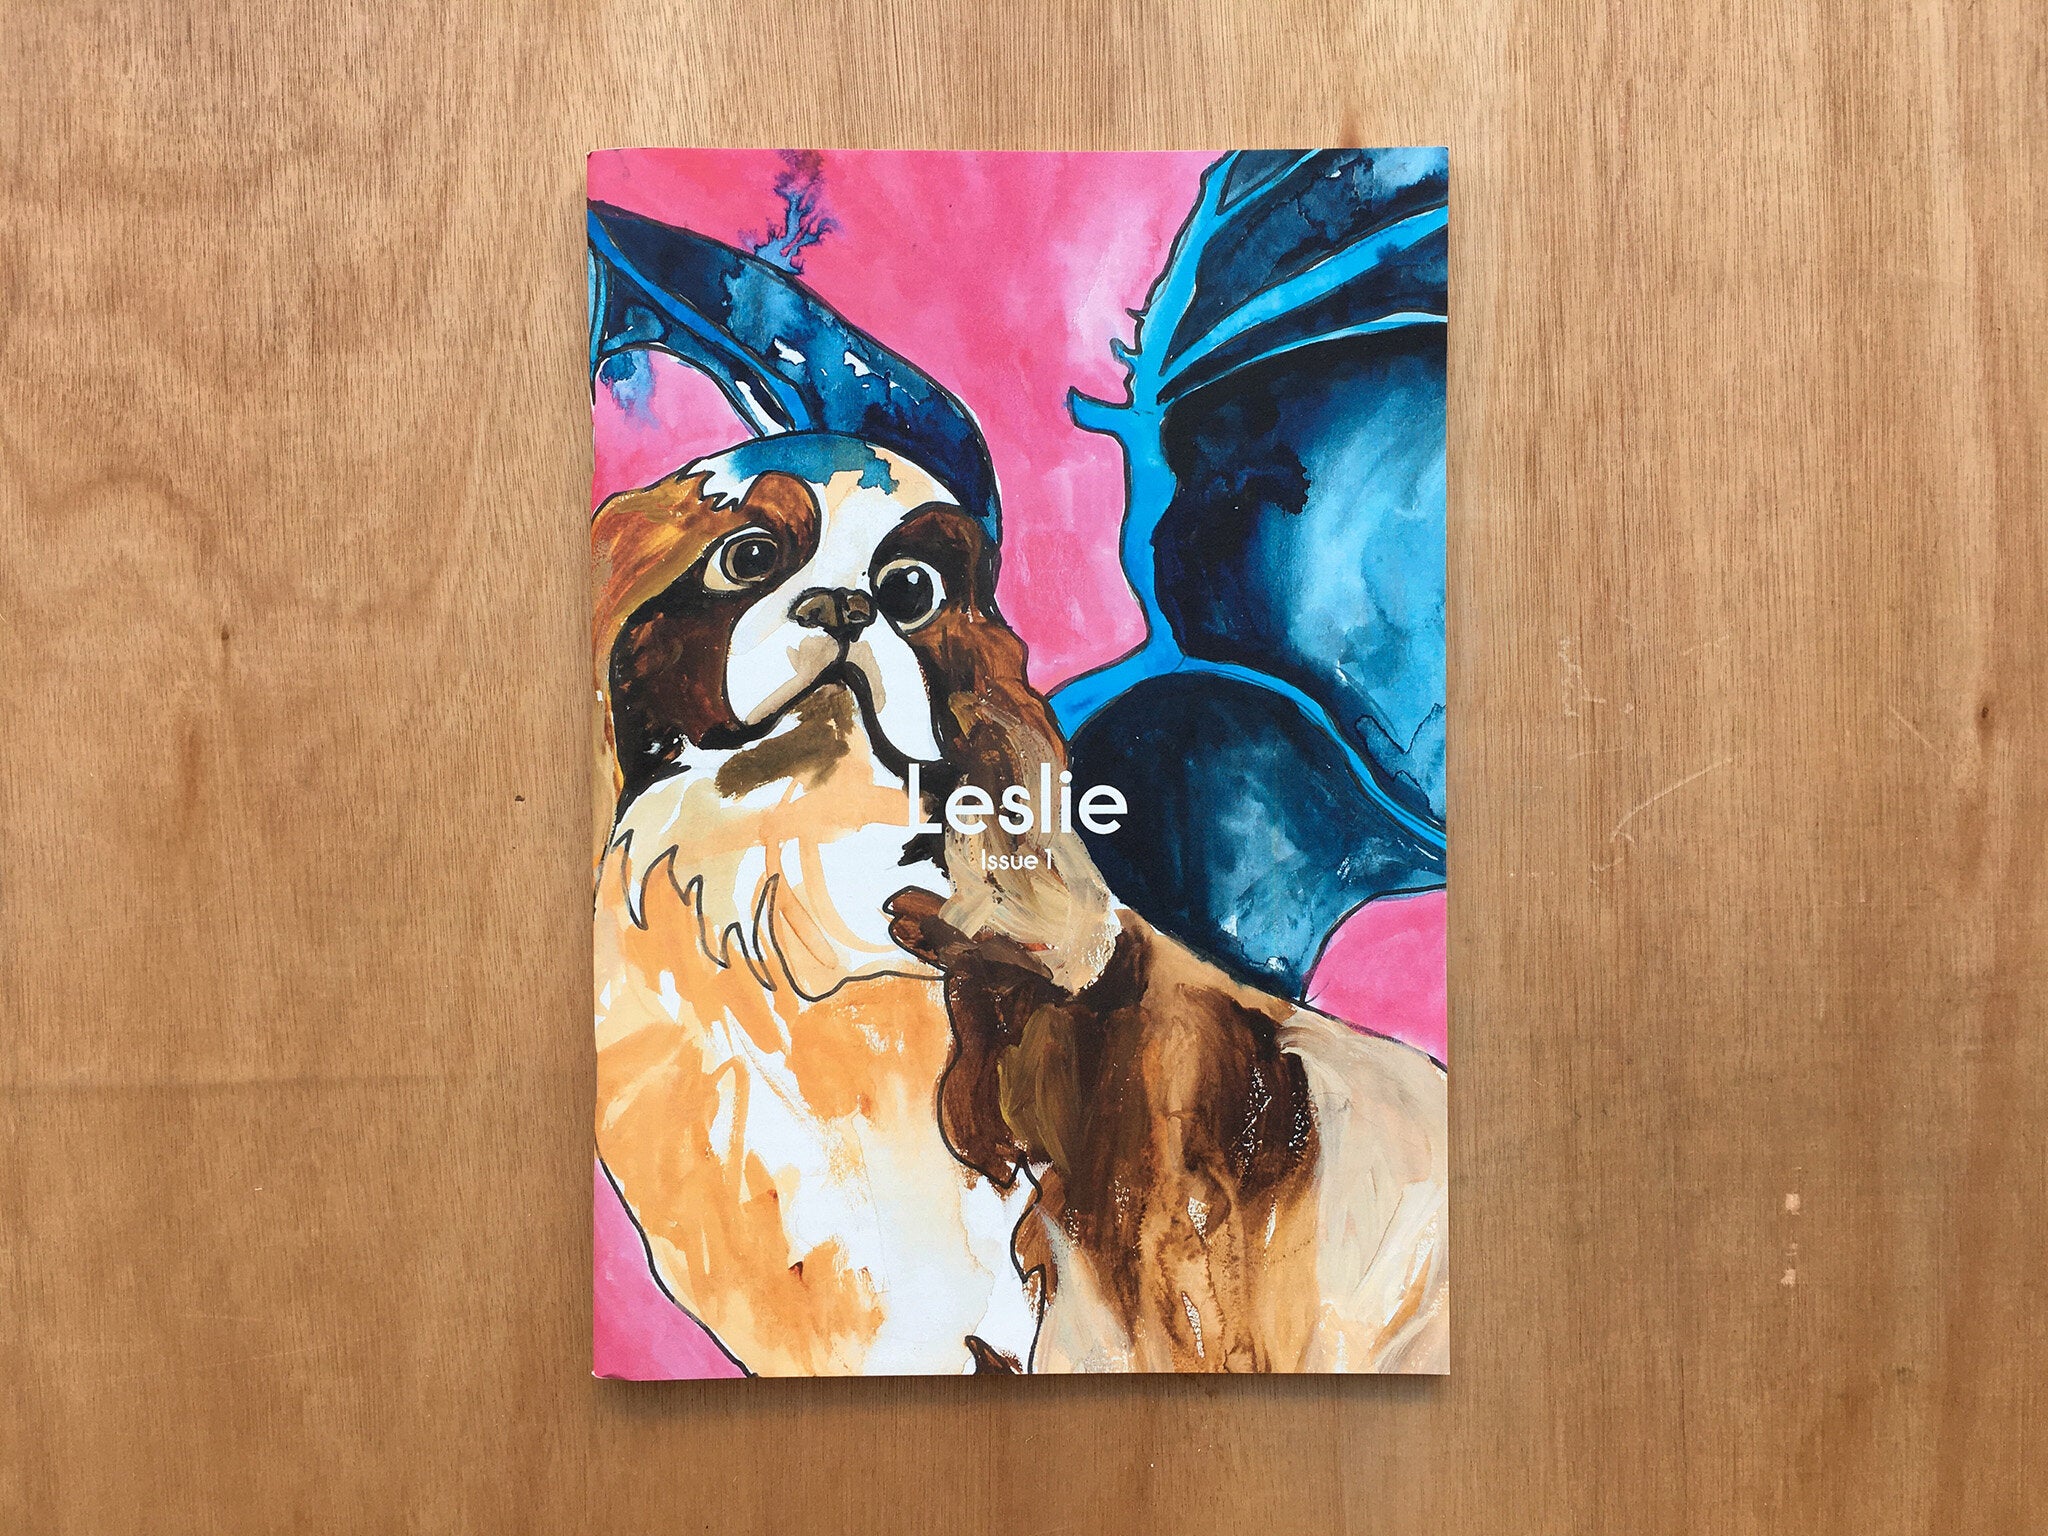 LESLIE: ISSUE 1